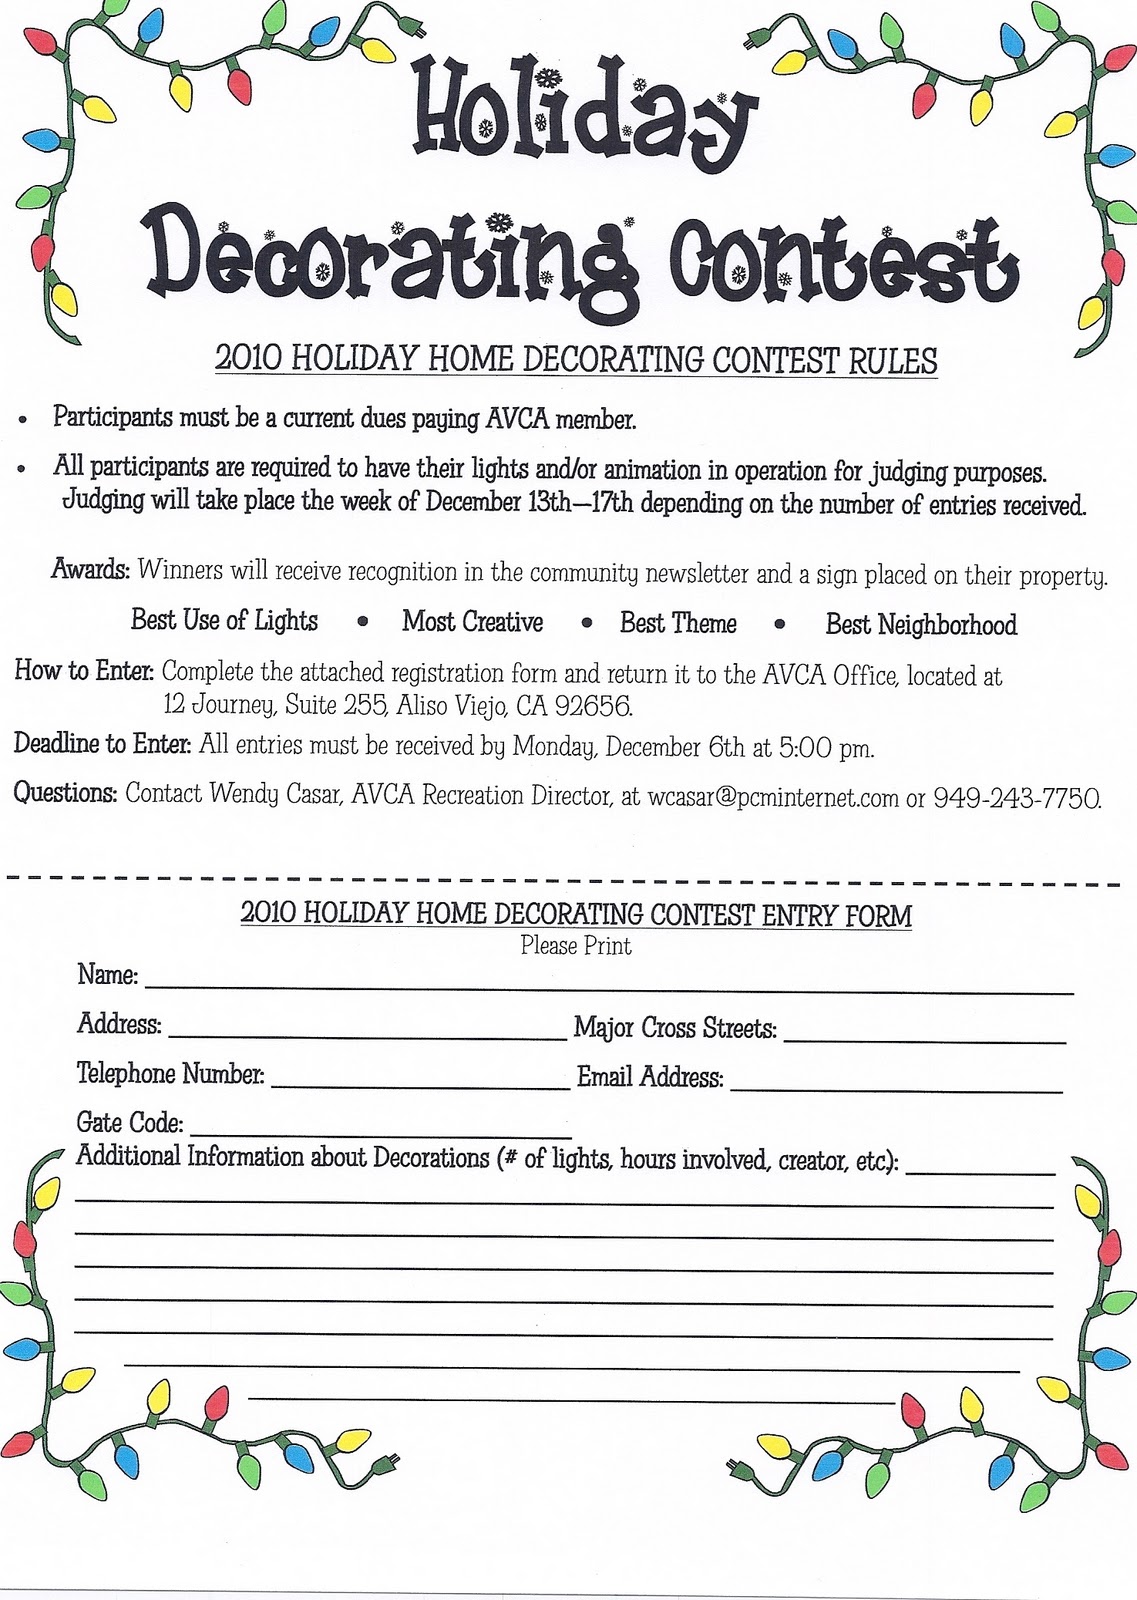 Aliso Viejo a great place to live Holiday Decorating Contest Info